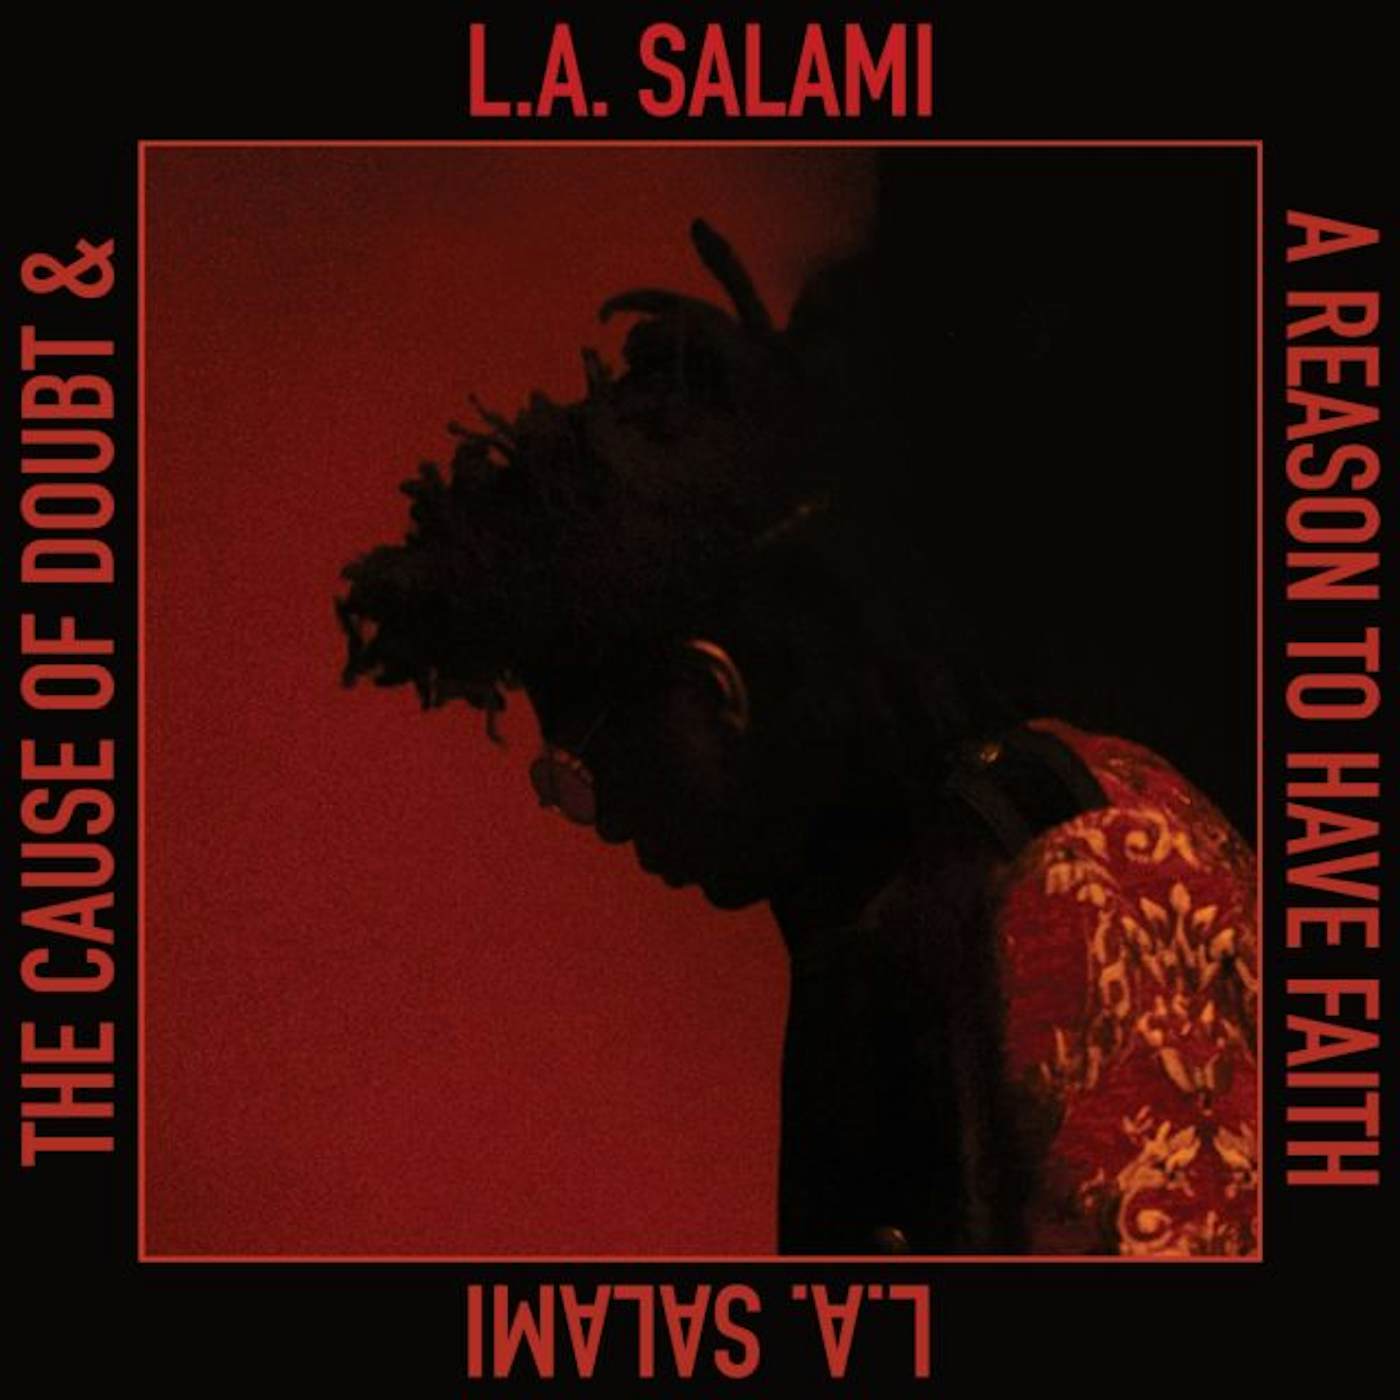 L.A. Salami The Cause Of Doubt & A Reason To Have Fa Vinyl Record